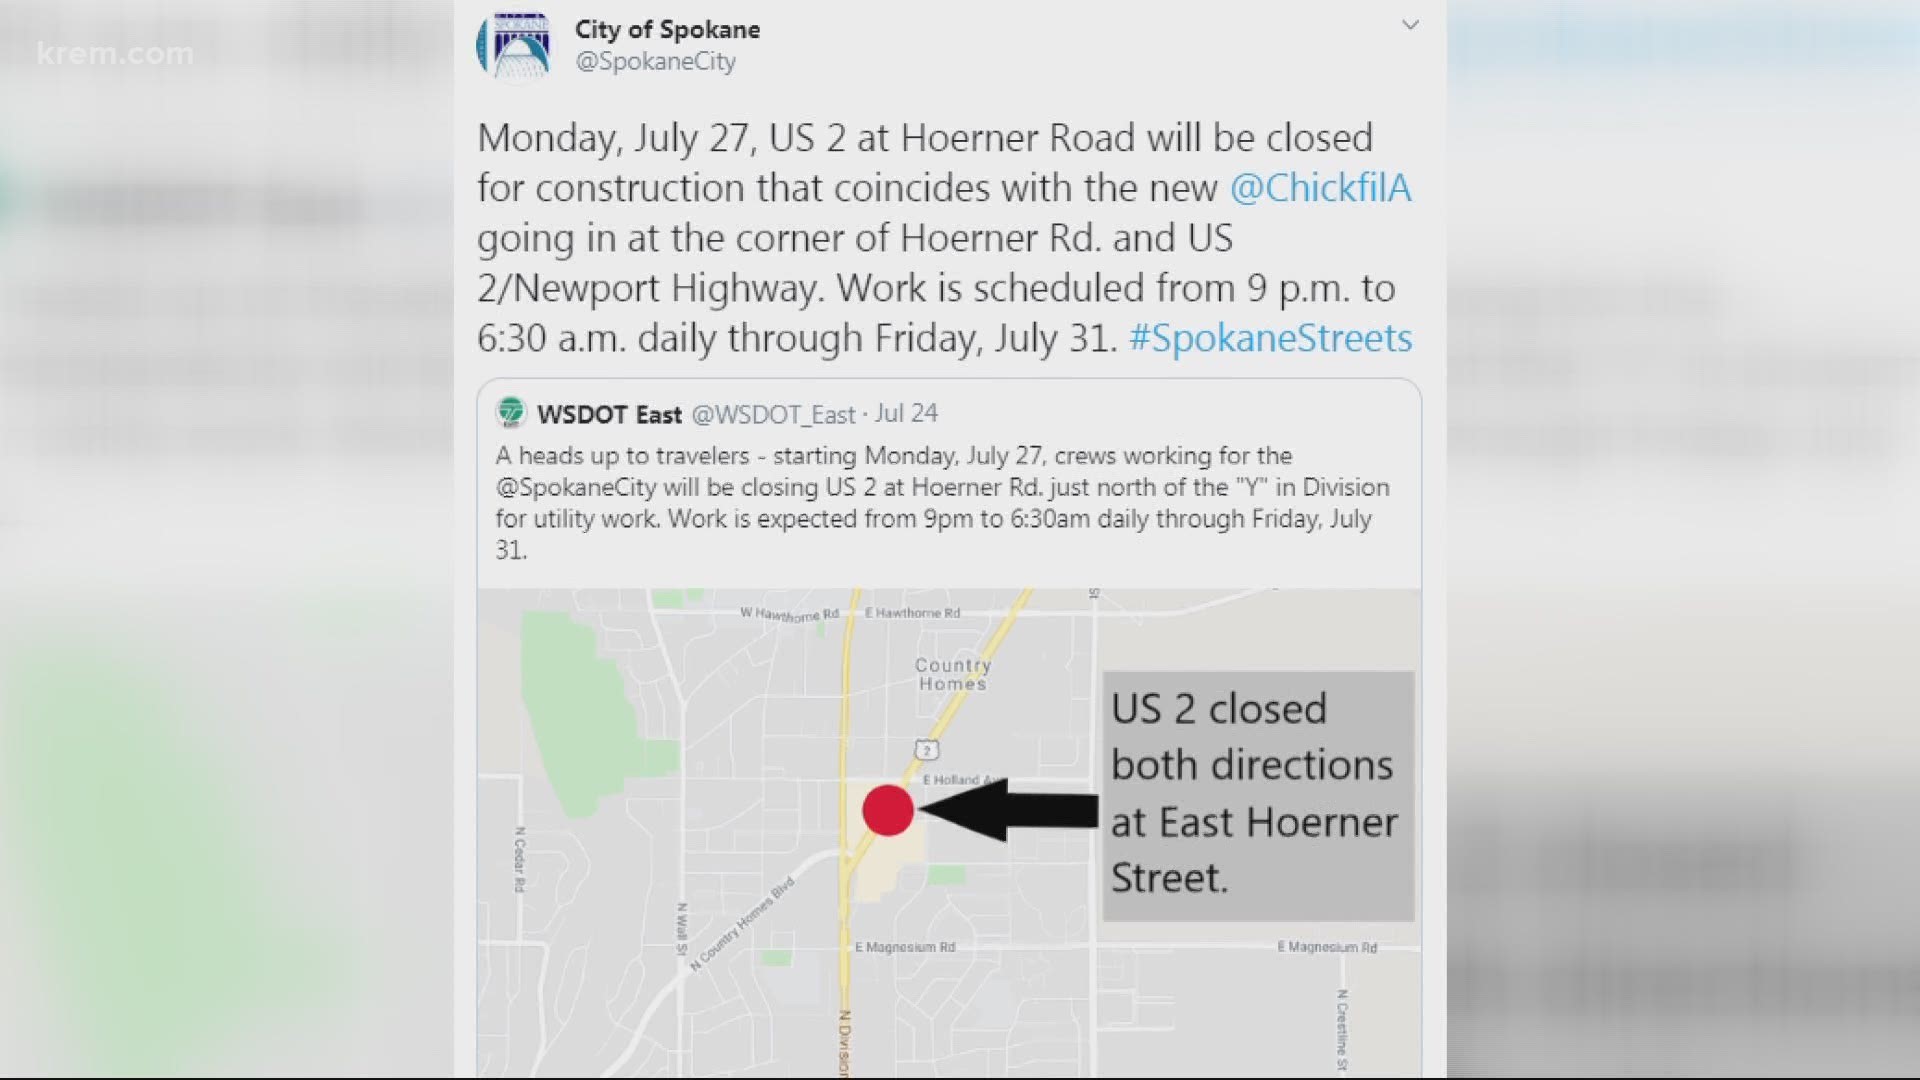 WSDOT and the City of Spokane confirmed the road closure is due to utility work being done for the new Chick-Fil-A coming soon.